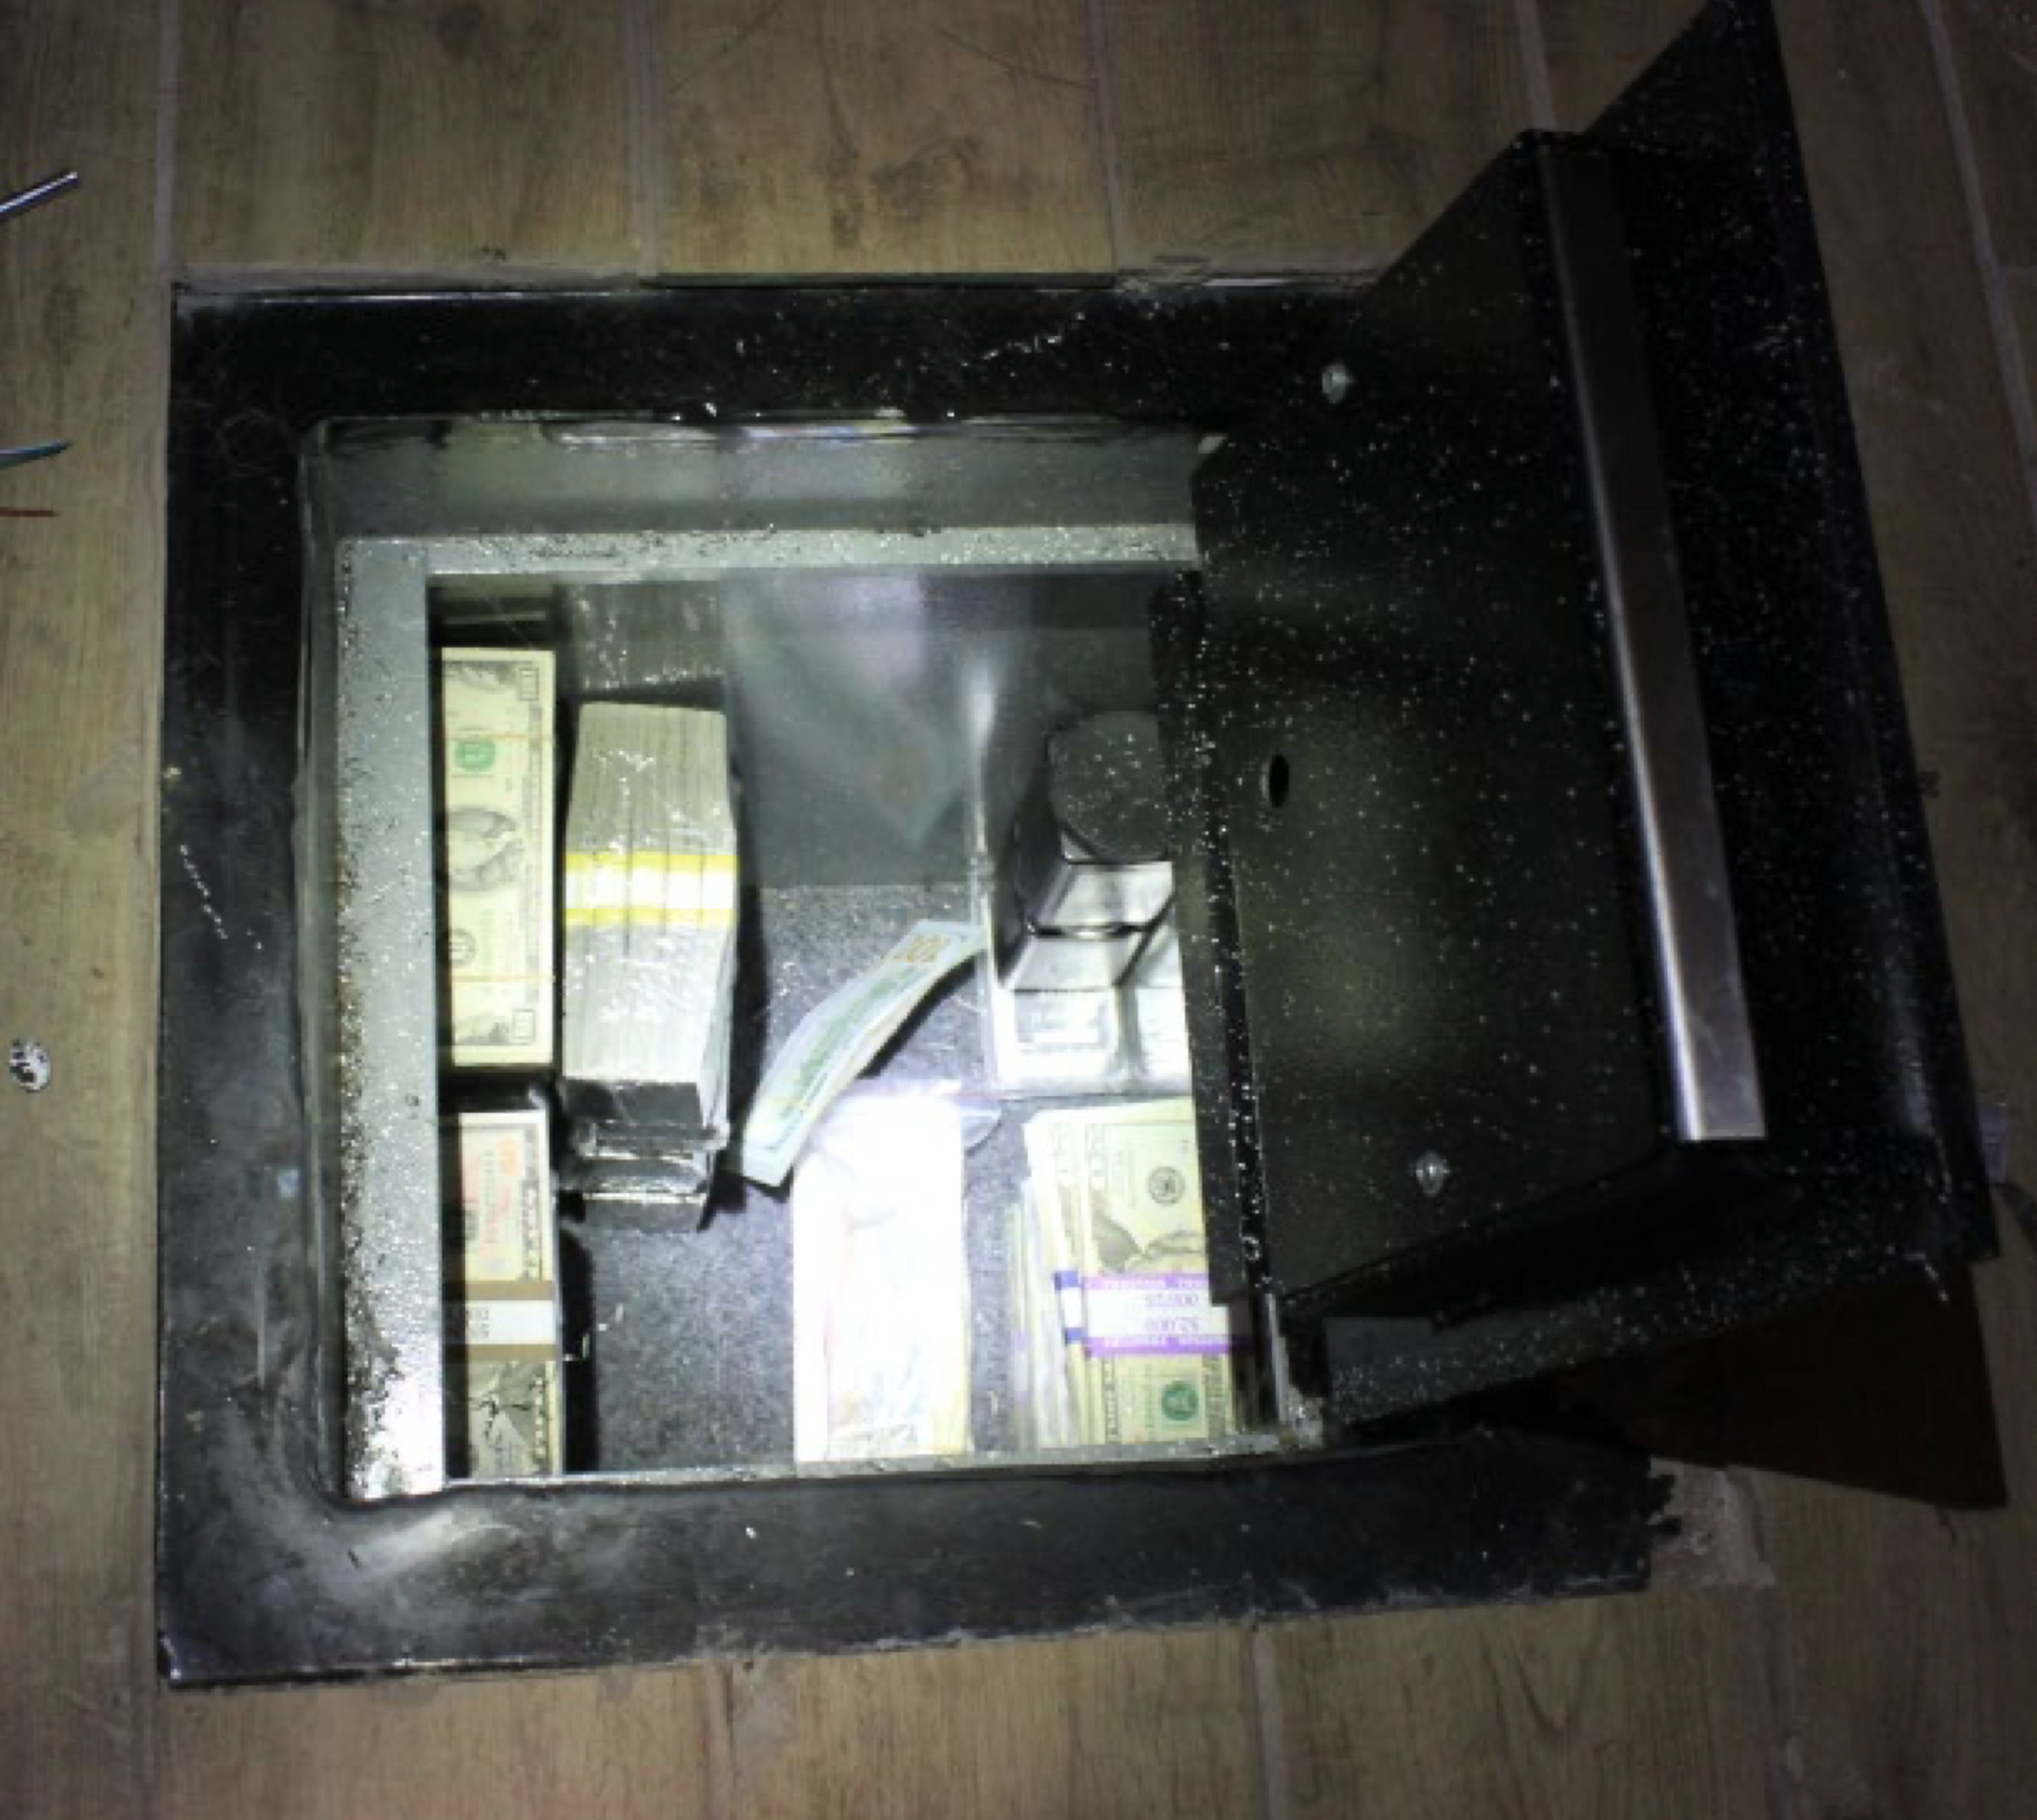 Image of a safe embedded in a wooden floor, containing cash and two metallic objects.